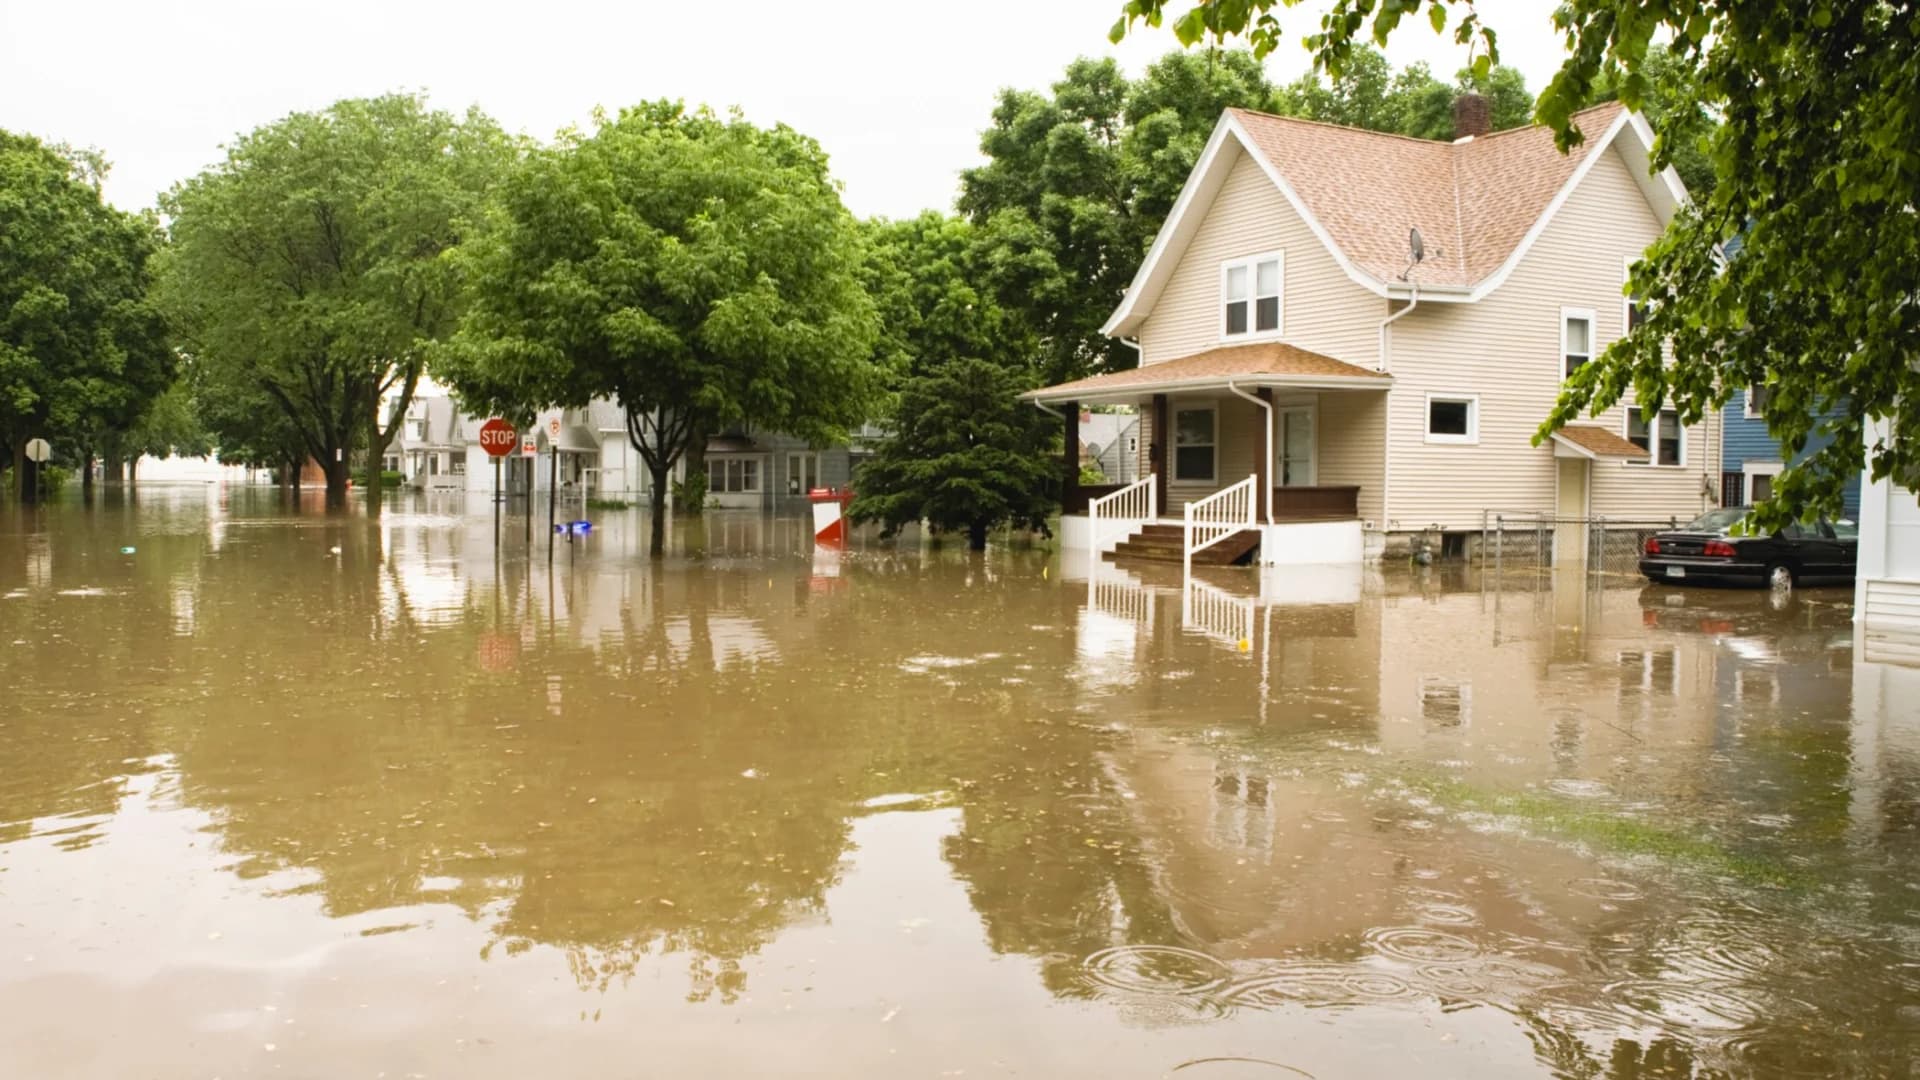 Flooding: Stay informed to stay safe